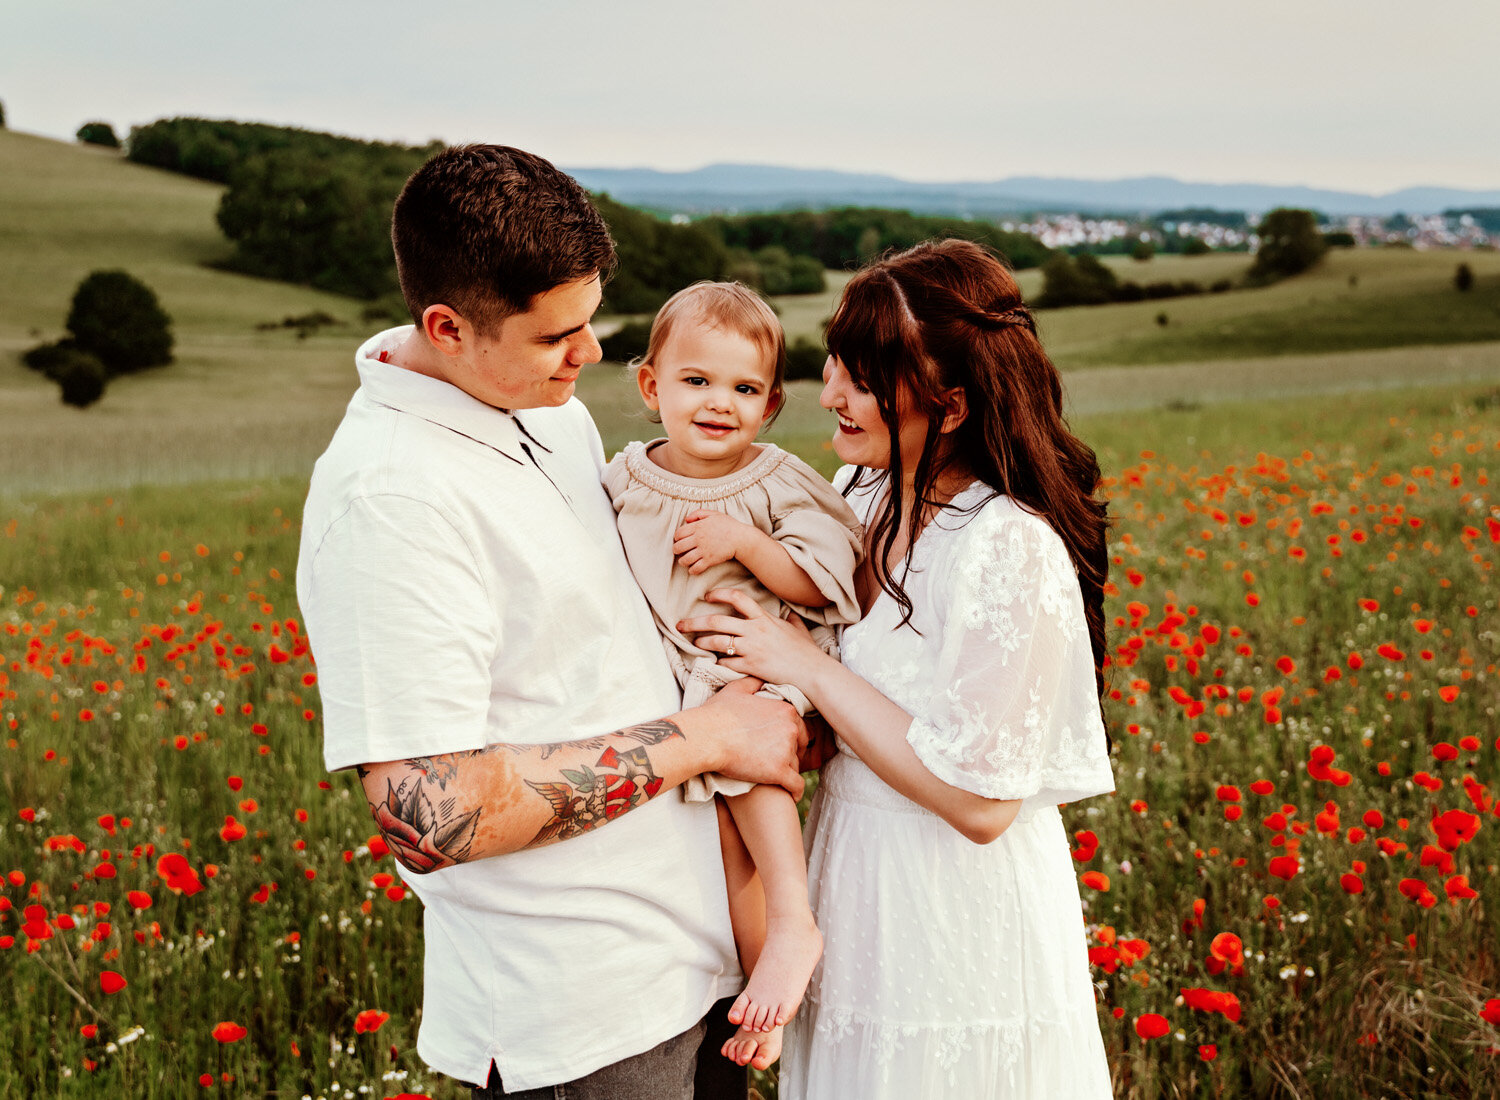 young-family-with-baby-girl-palying-in-poppy-flower-field-in-ramstein-family-photographer-sarah-havens-kaiserslautern-germany (4).jpg